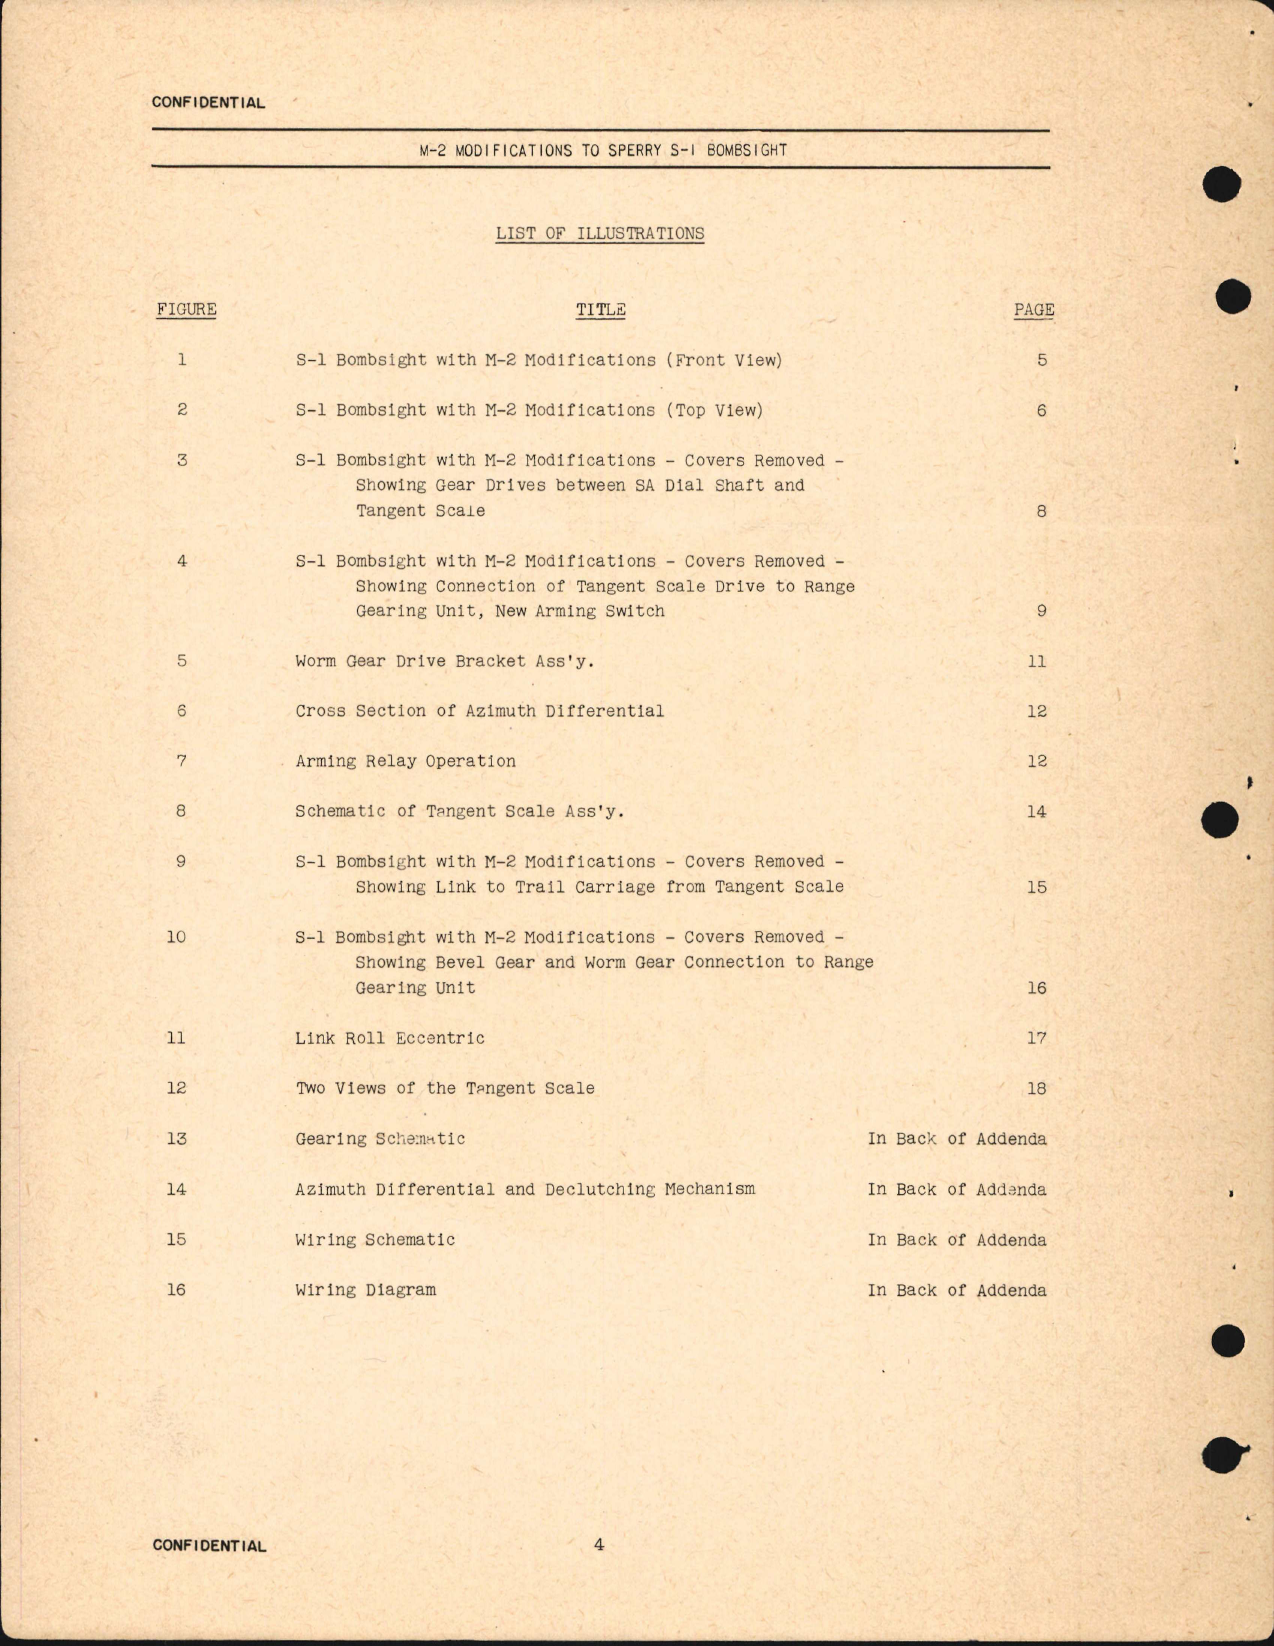 Sample page 6 from AirCorps Library document: Sperry Bombsight Type S-1 with M-2 Modifications